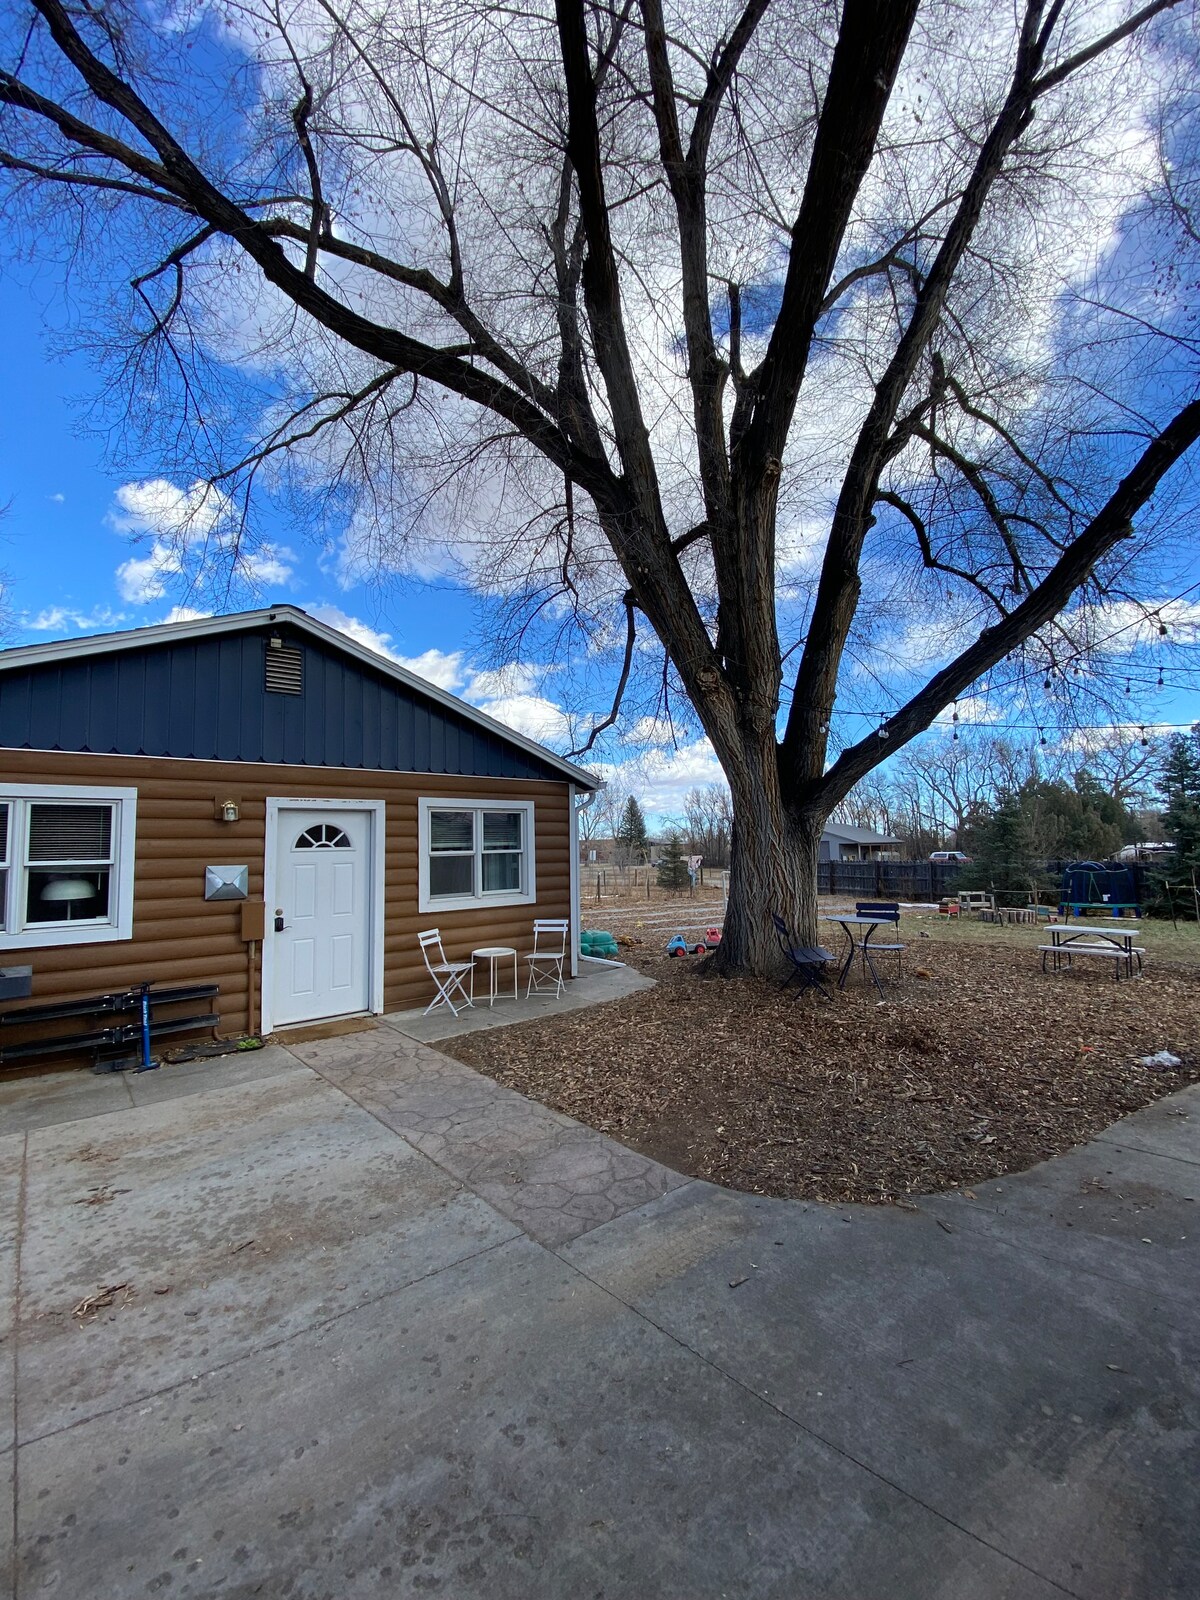 Cottage on Acreage in Ft Collins